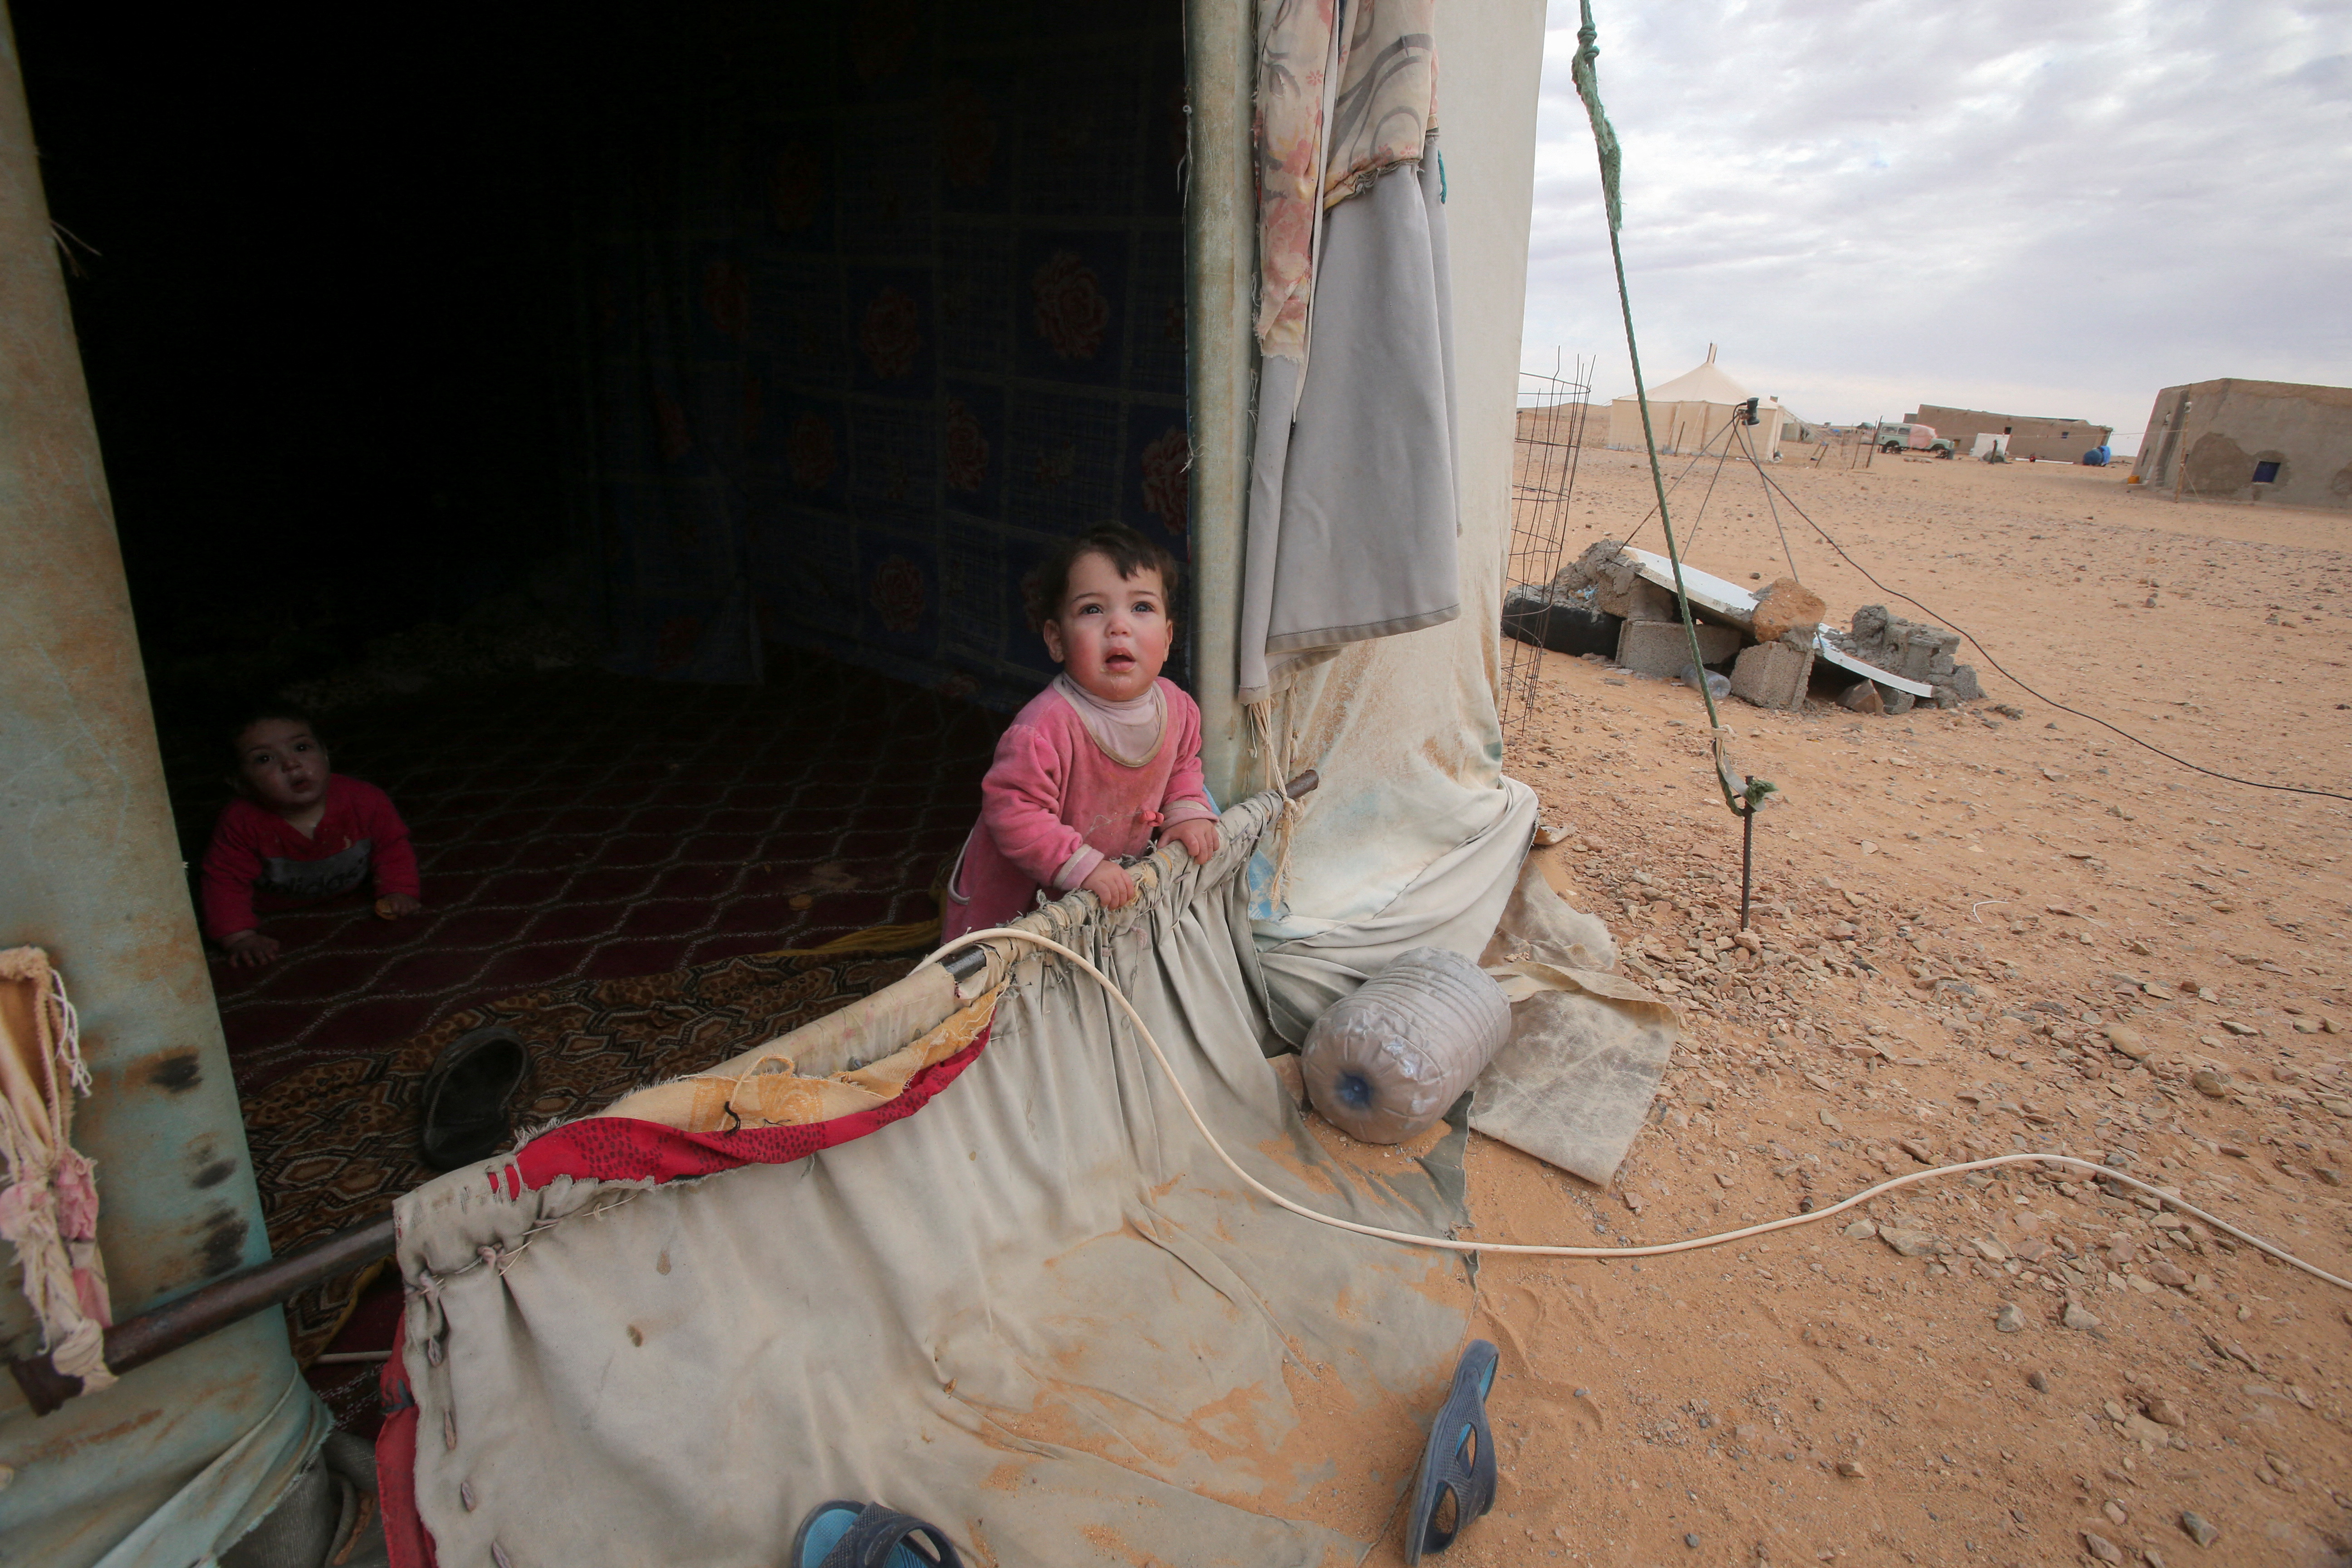 A child looks out from a tent at a Sahrawi refugee camp in Tindouf